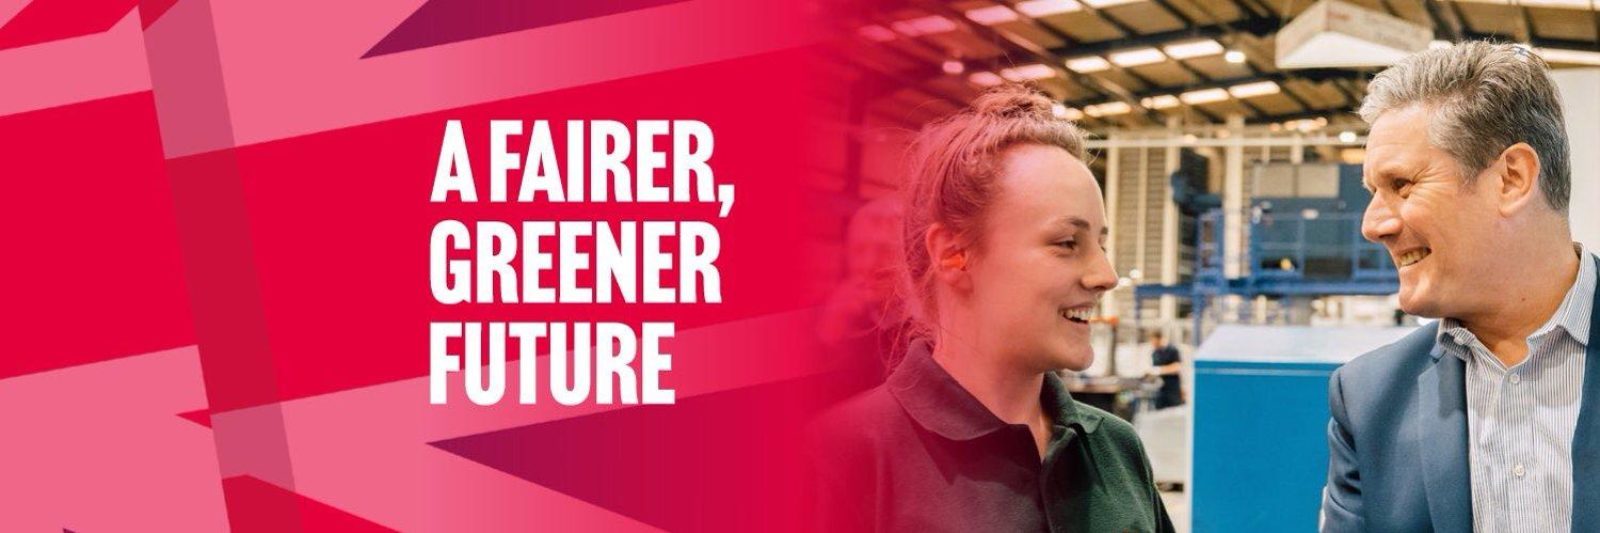 A fairer, greener future with Labour